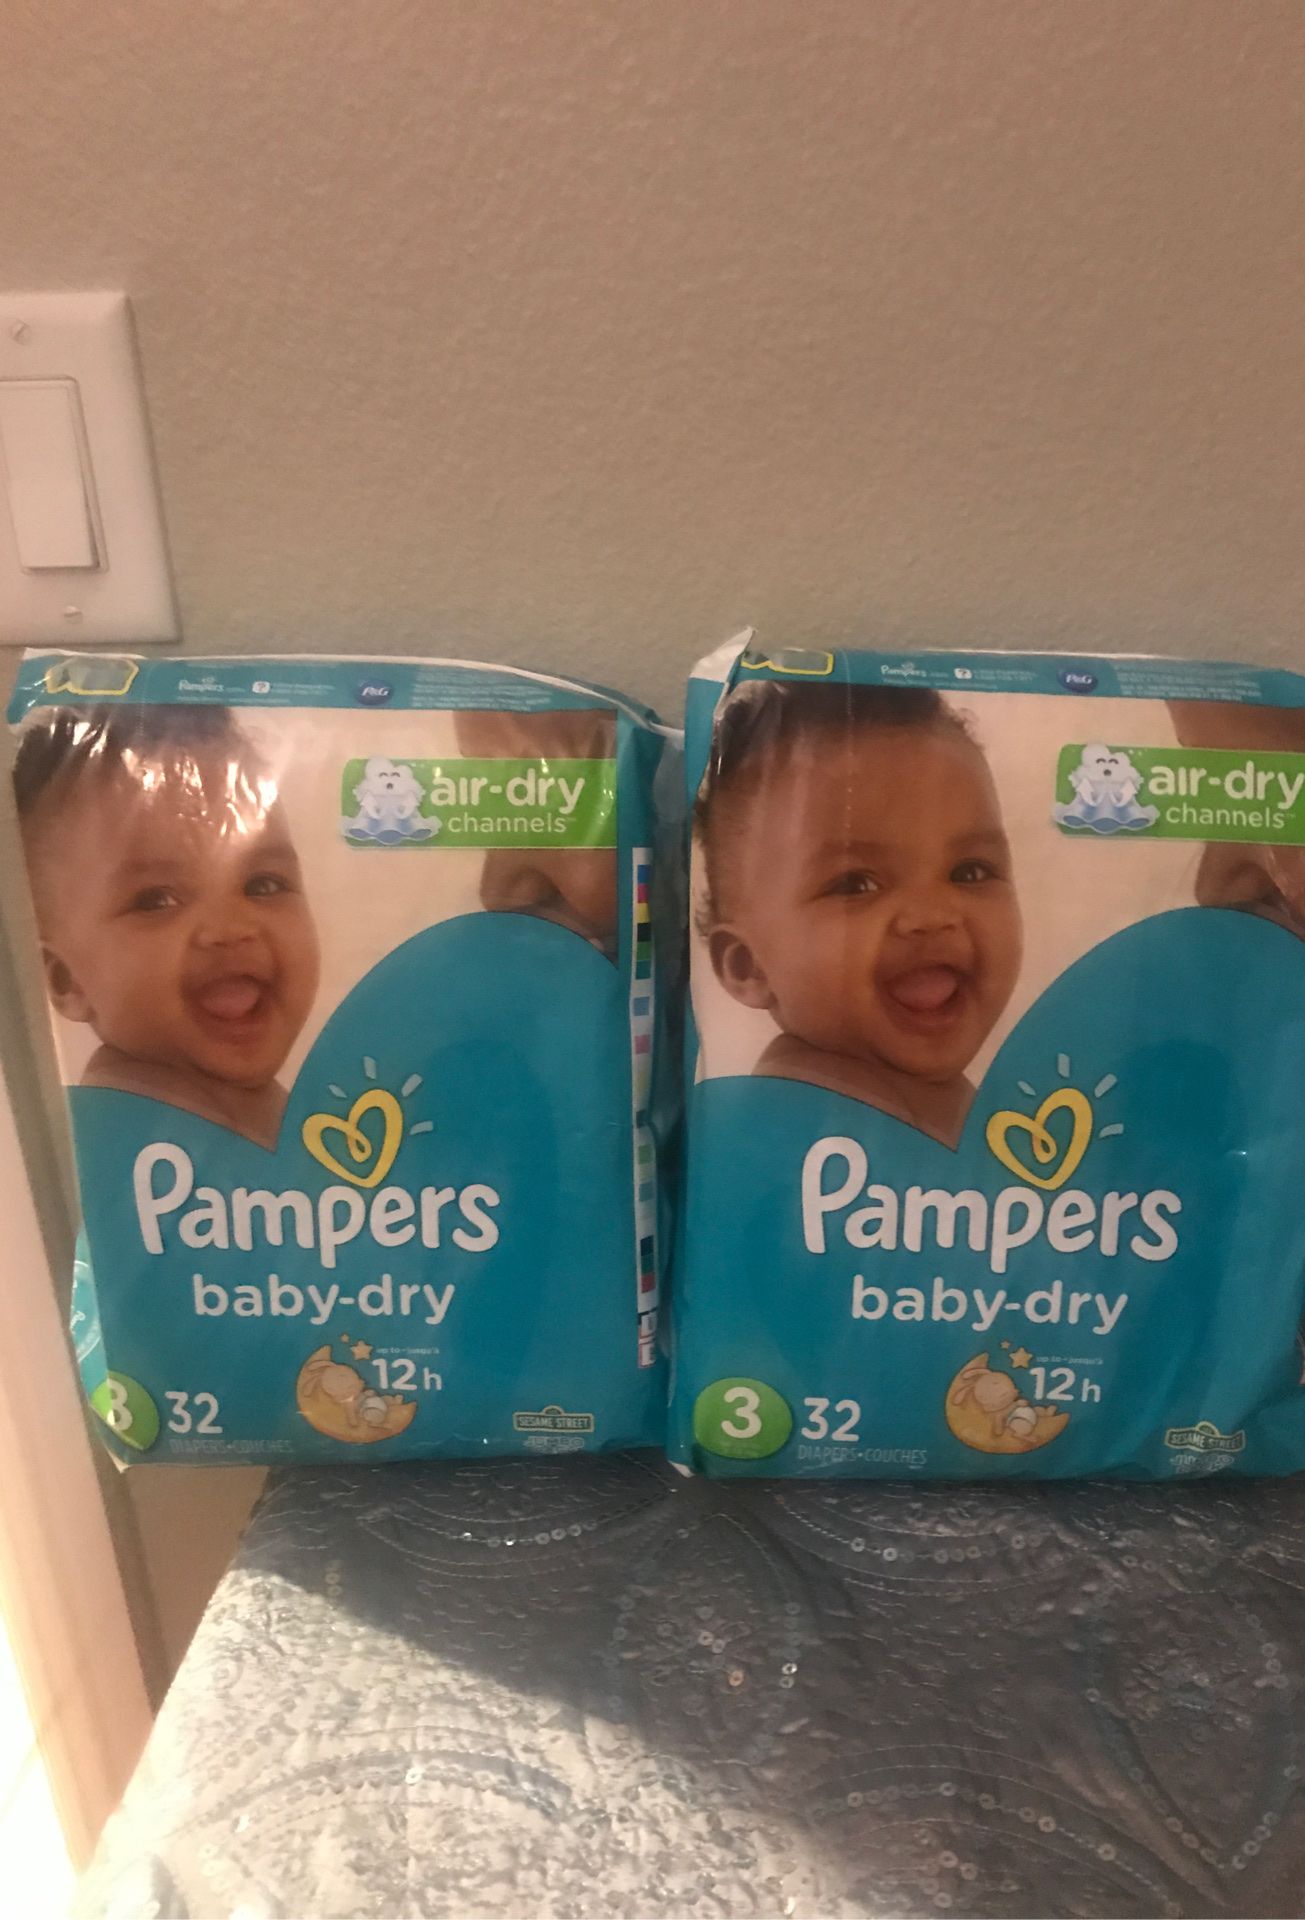 Diapers size 3 two packs for $12